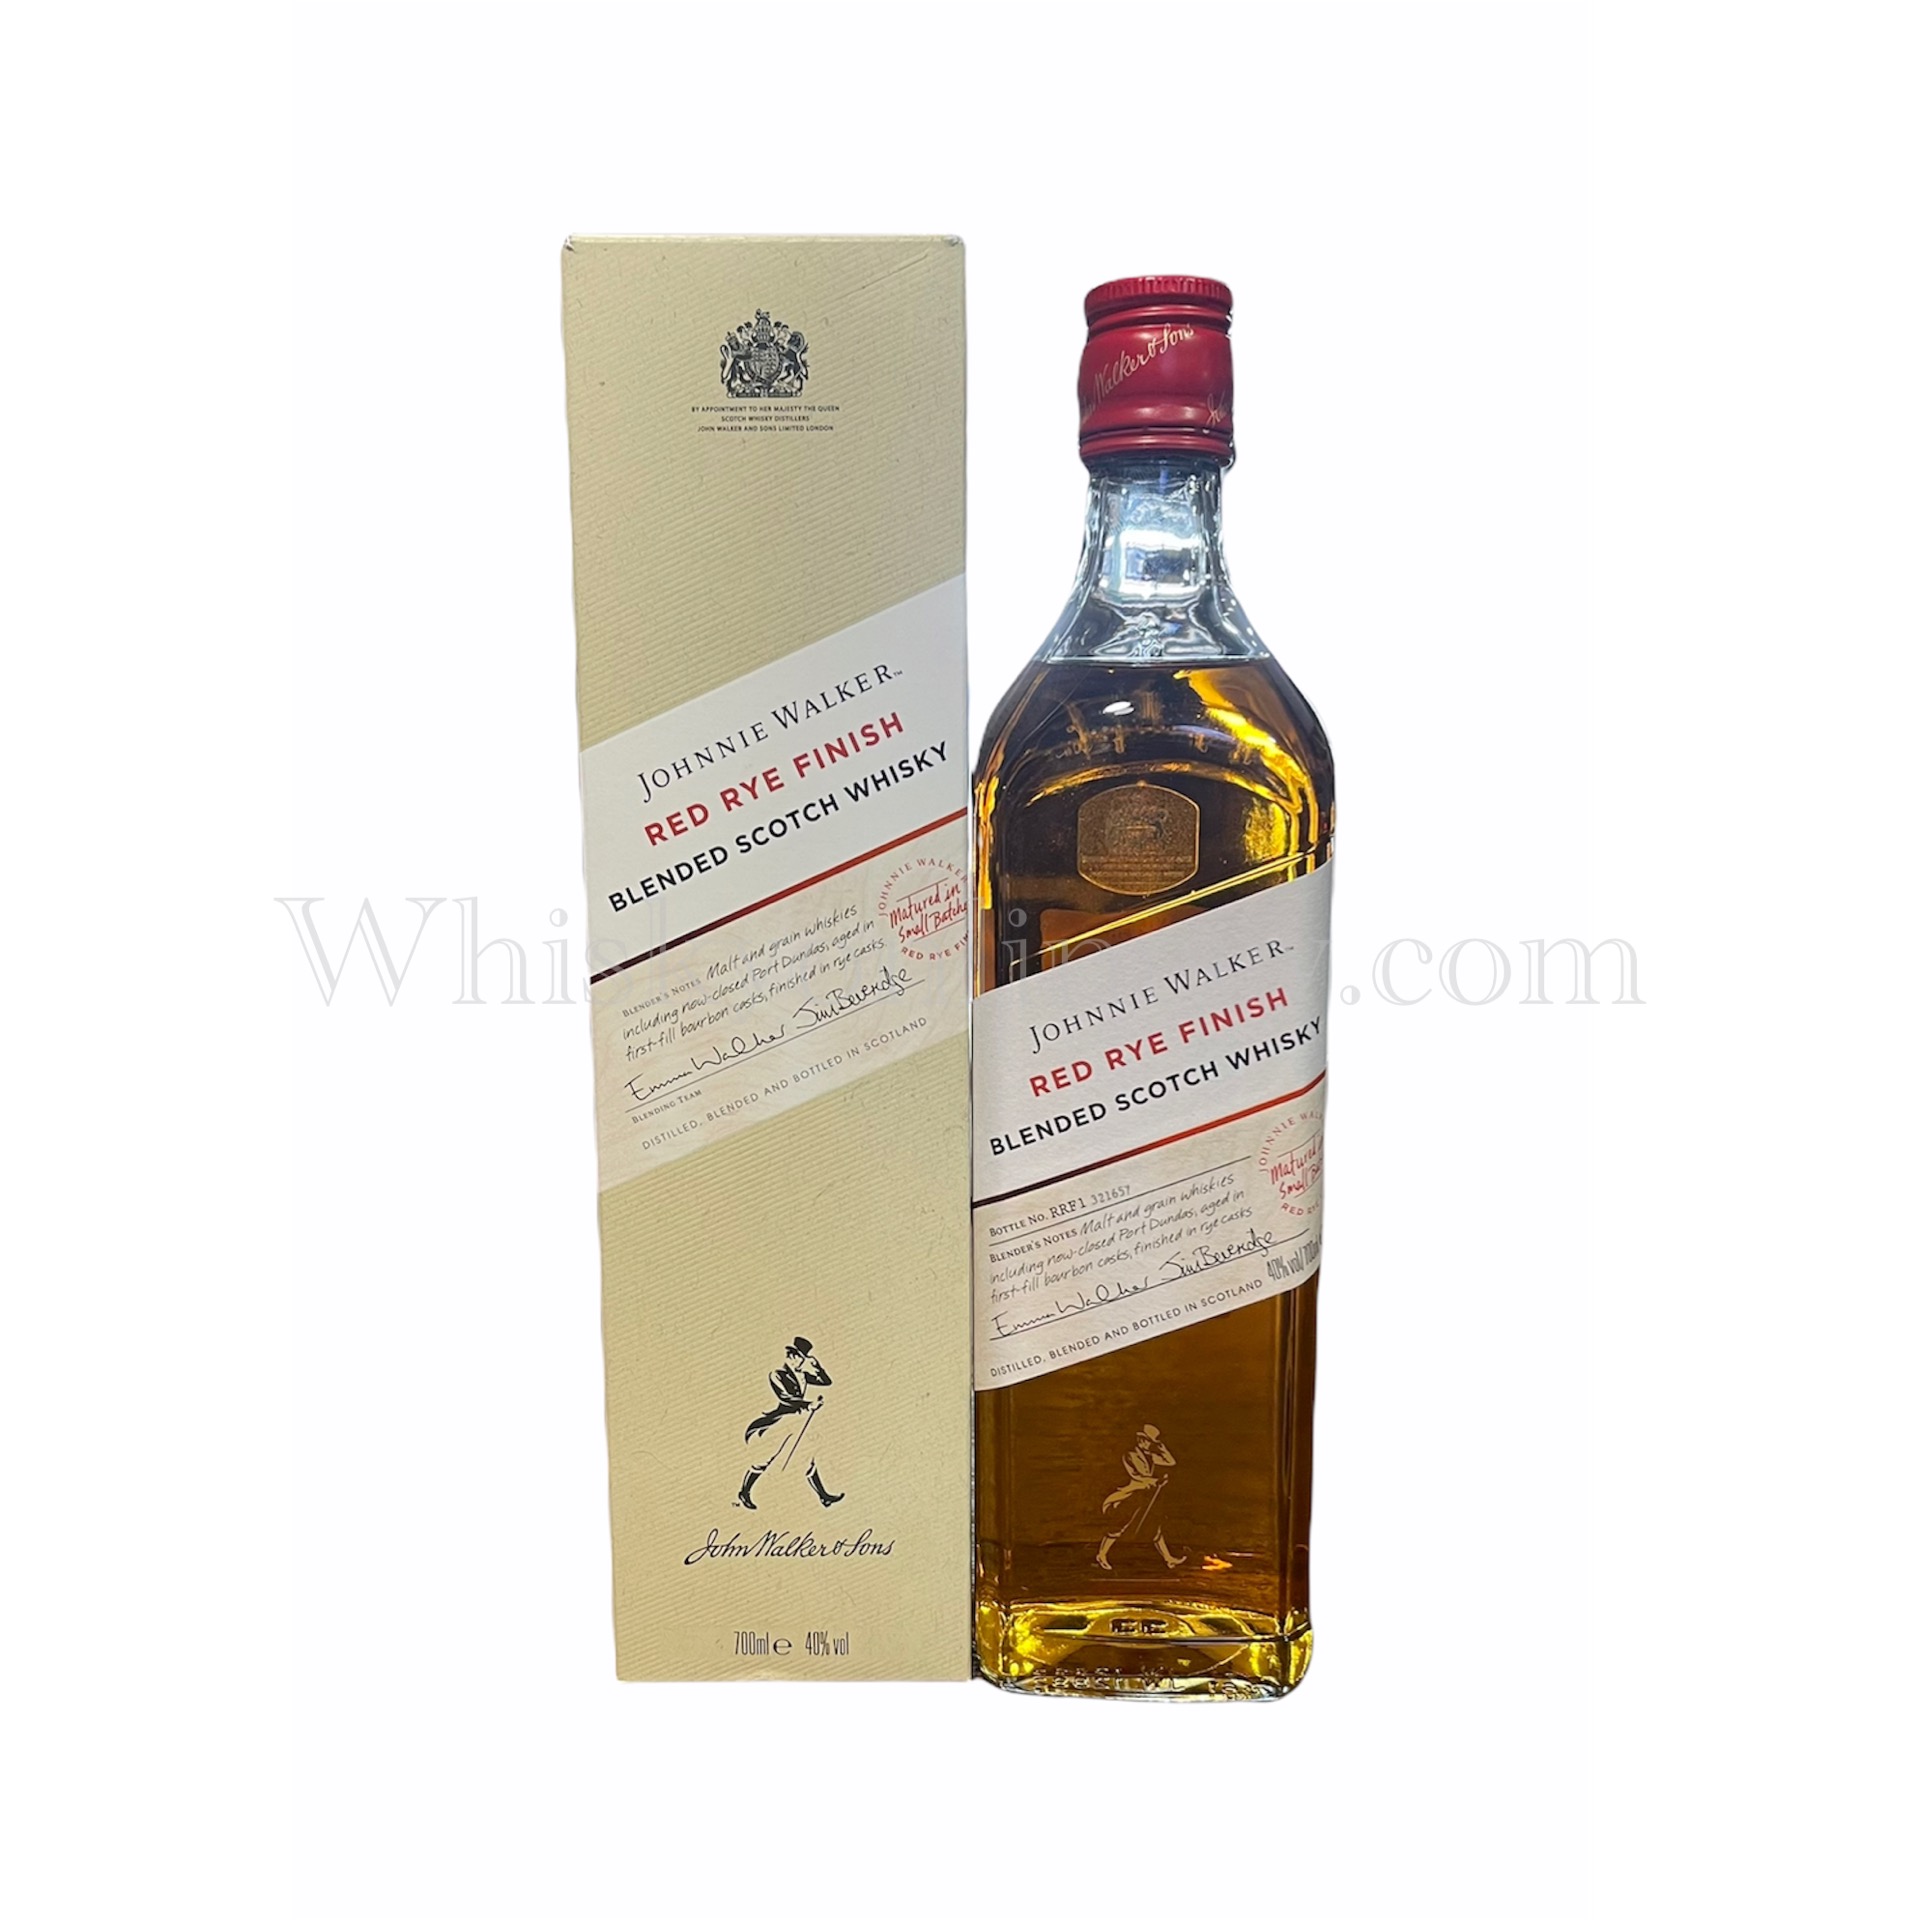 Whisky Online Cyprus - Johnnie Walker Red Rye Finish Small Batch (70cl, 40%)